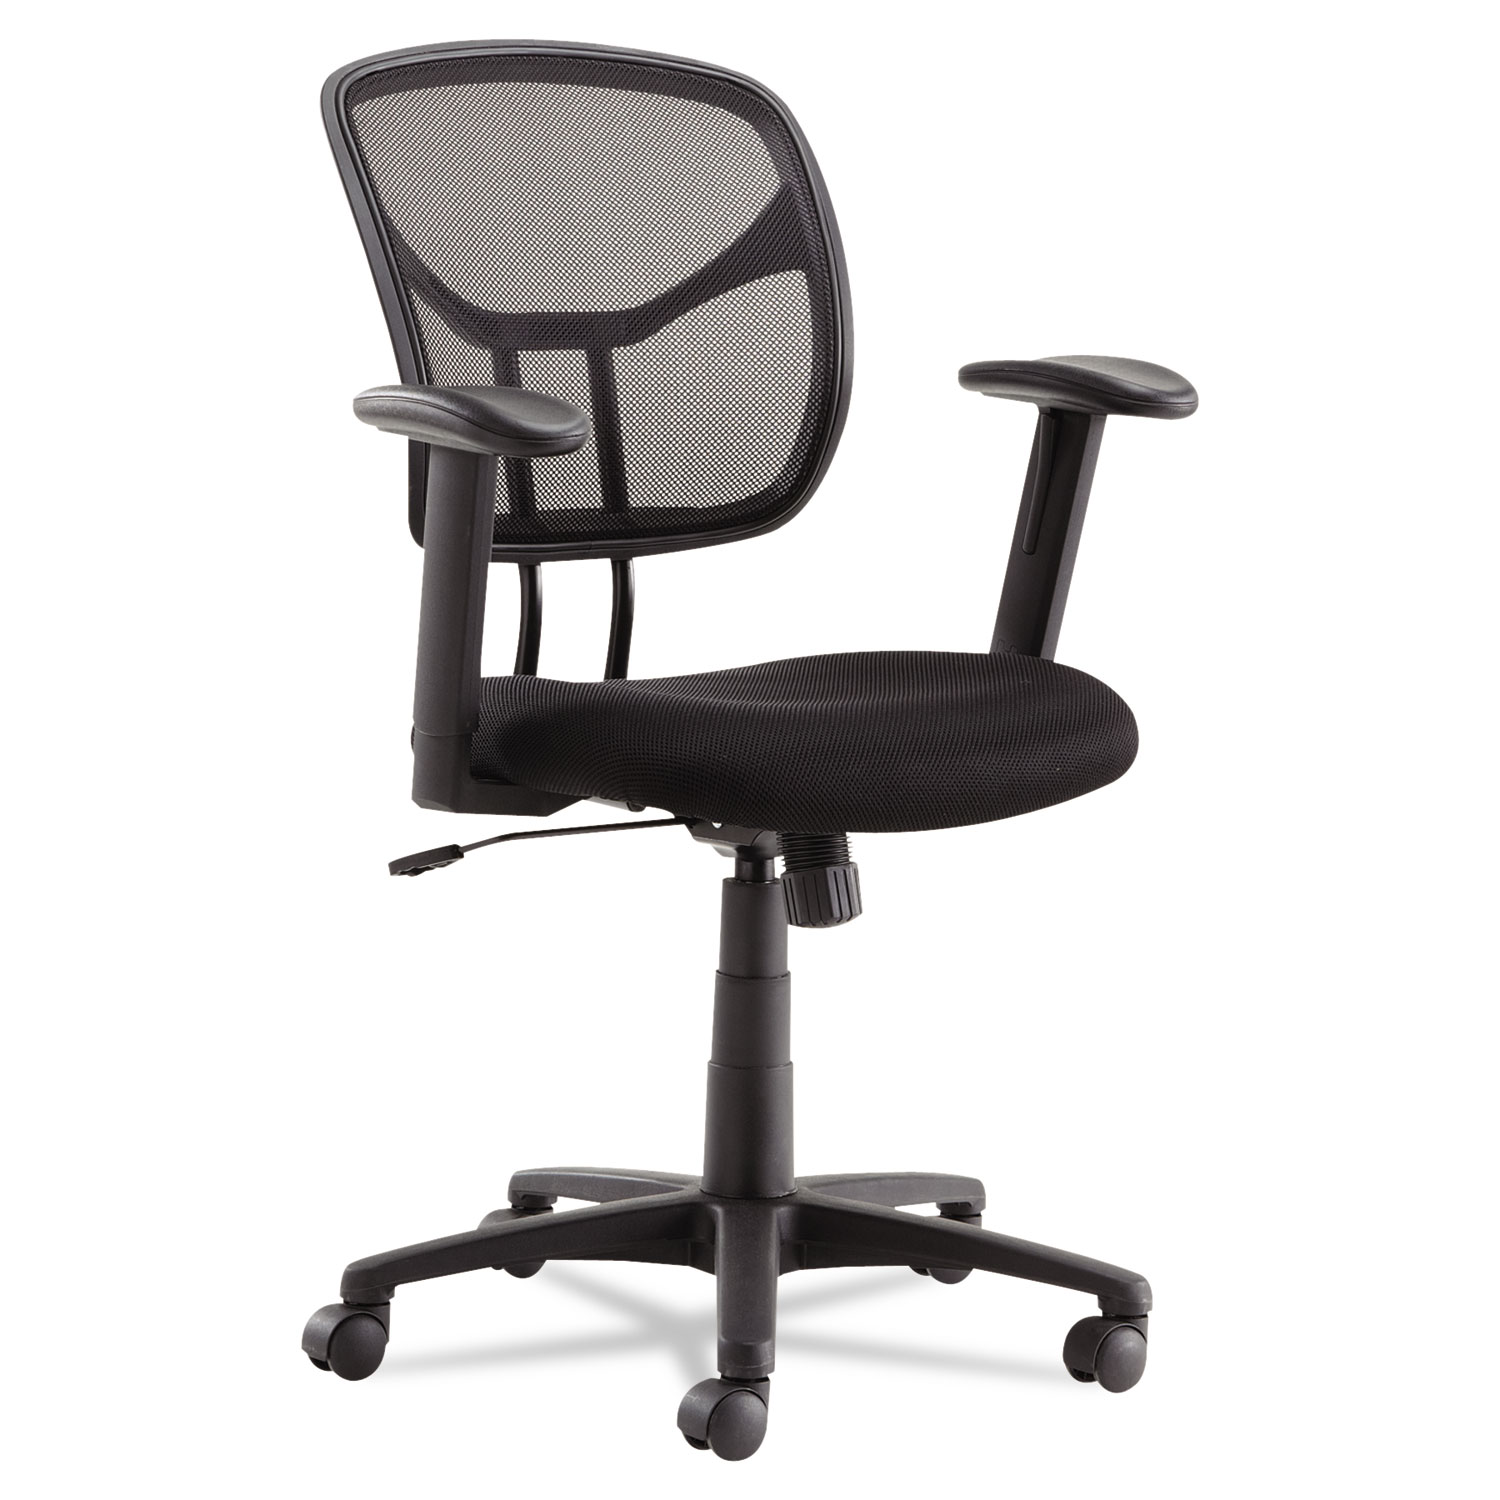  OIF OIFMT4818 Swivel/Tilt Mesh Task Chair with Adjustable Arms, Supports up to 250 lbs., Black Seat/Black Back, Black Base (OIFMT4818) 